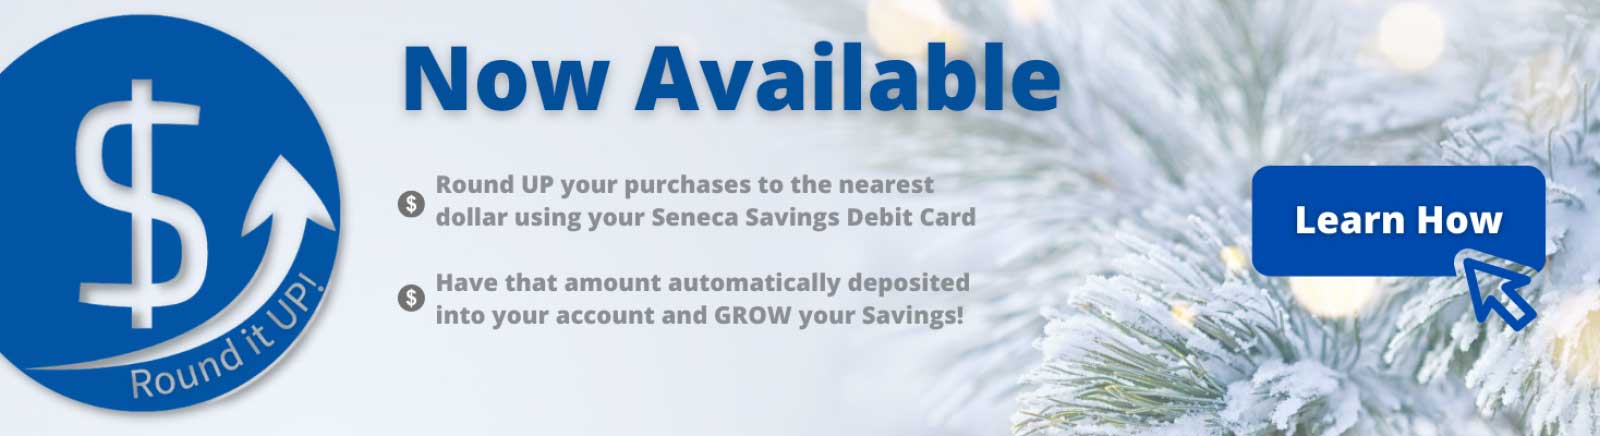 round up your debit card purchases to grow your savings with seneca savings